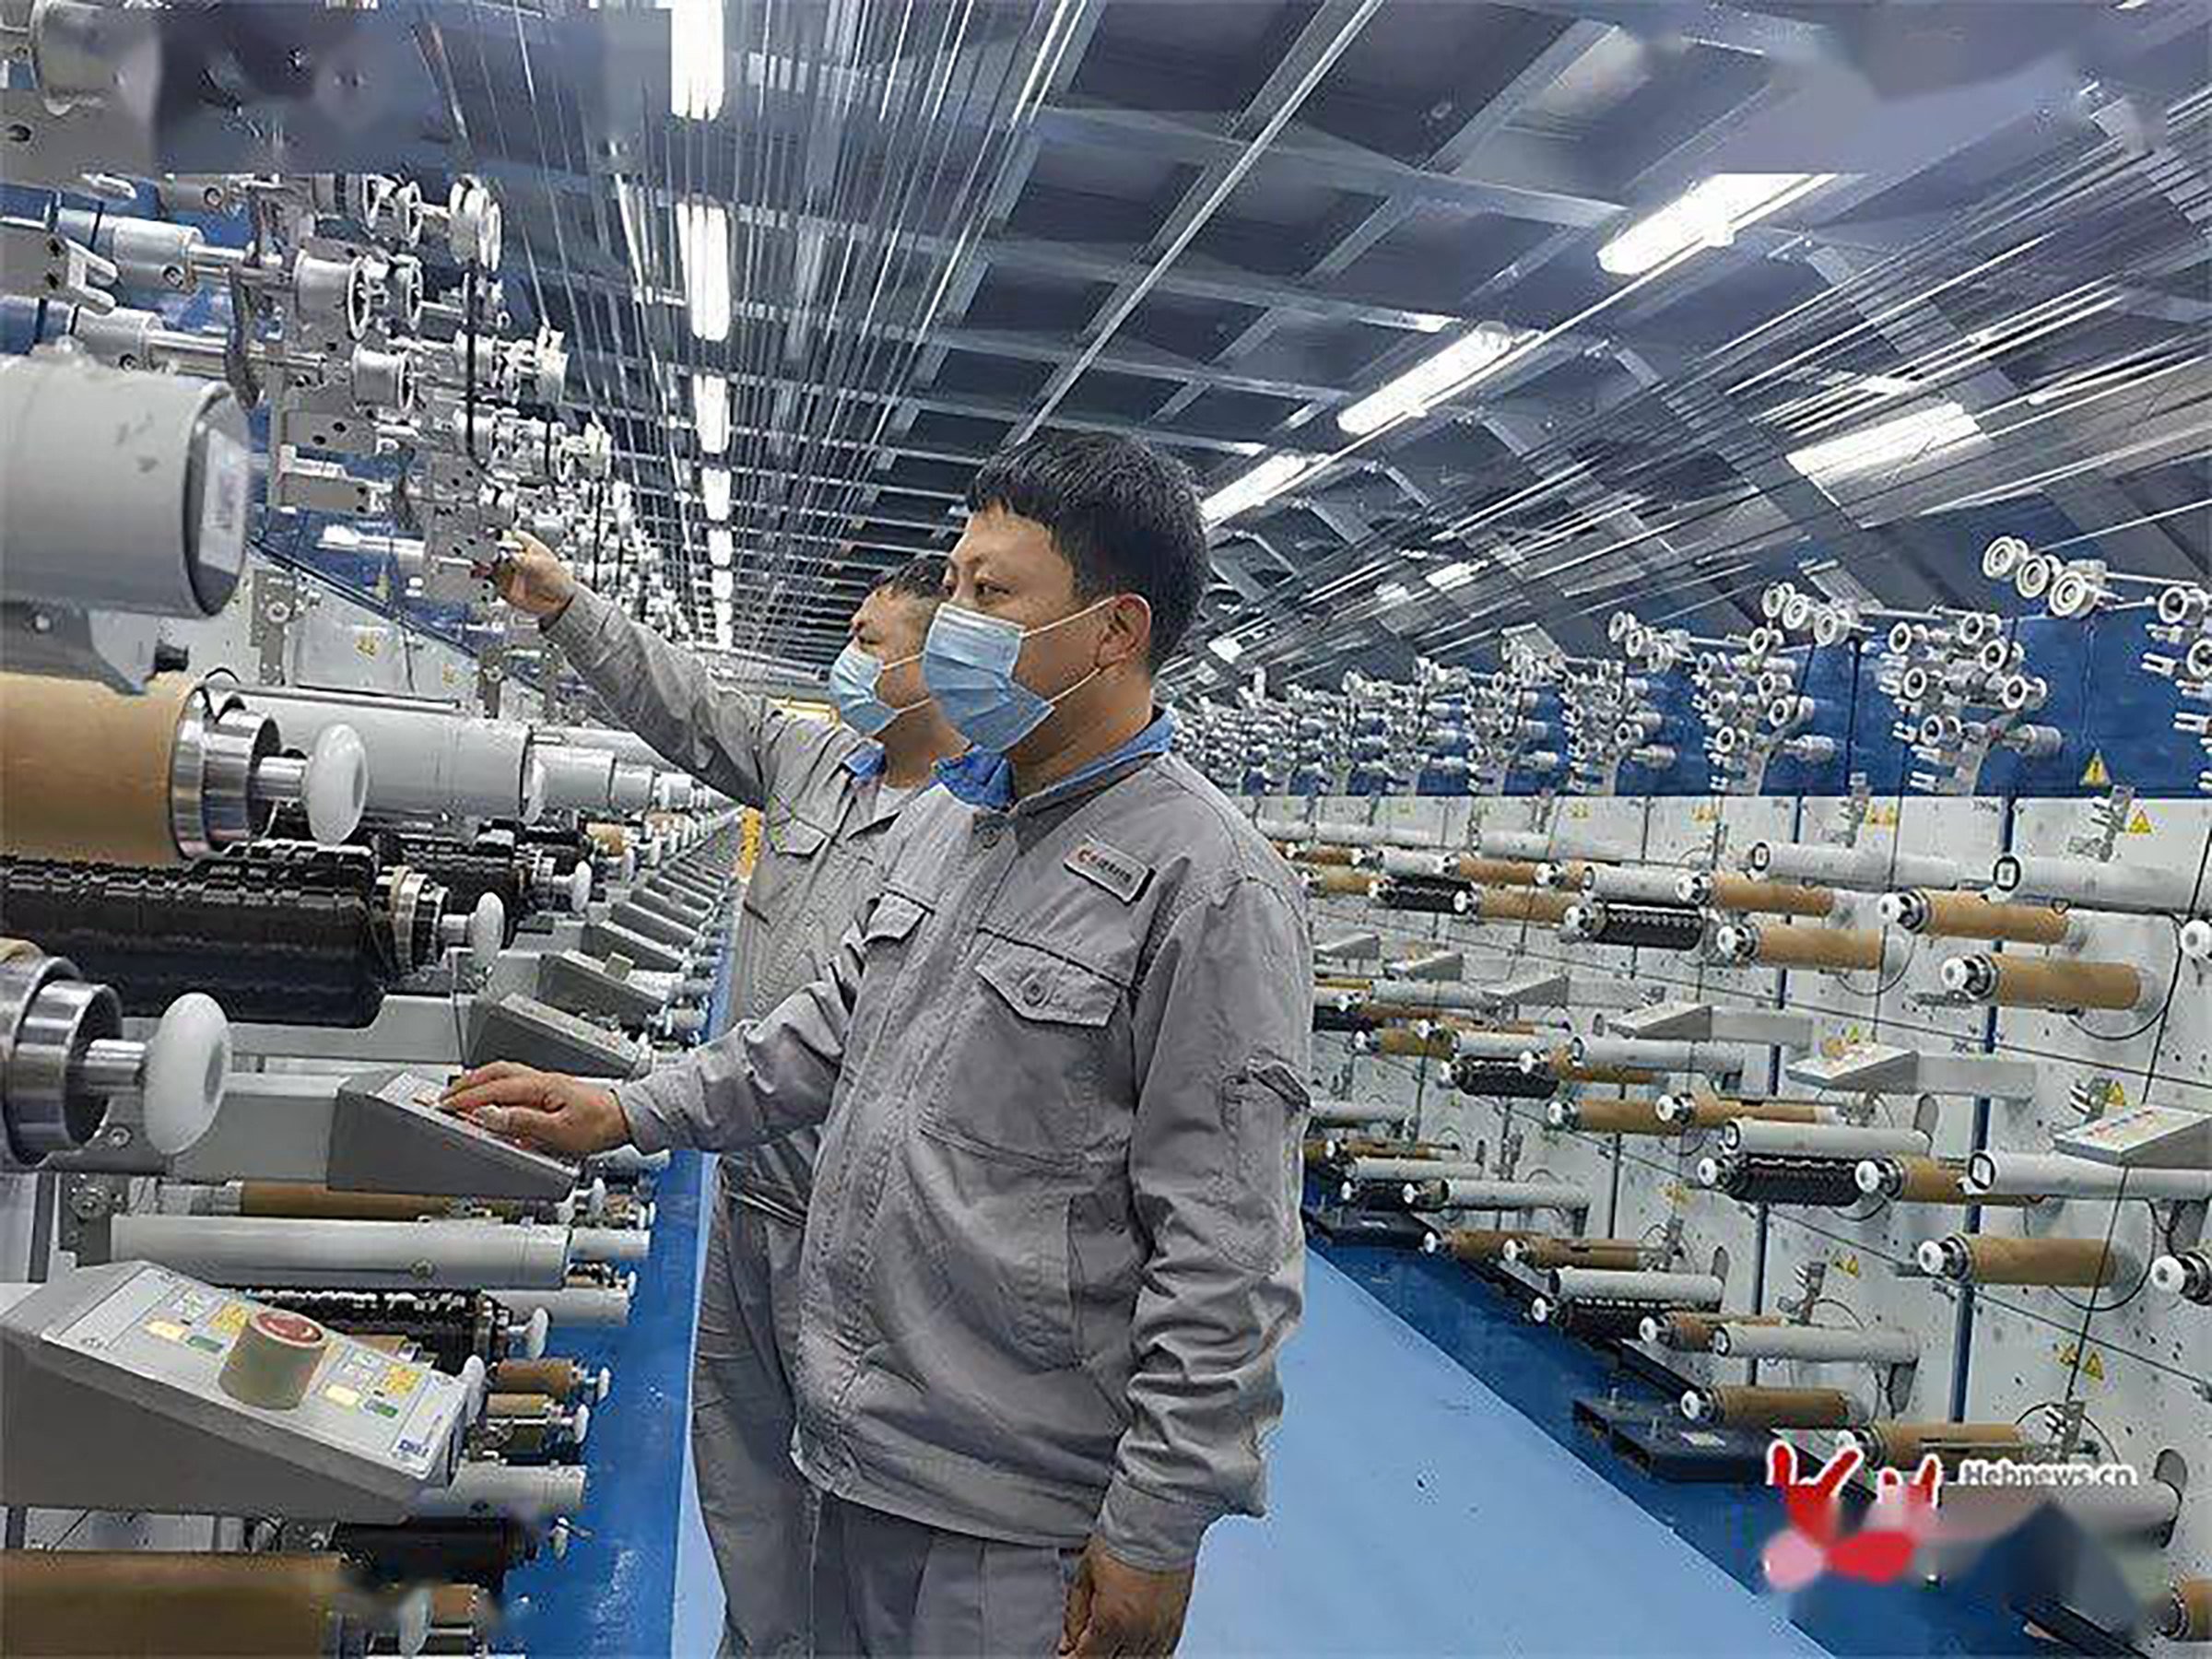 The production line by Changsheng Technology can make 1,700 tonnes (1,874 tons) of high-performance, ultra-strong carbon fibre each year. Photo: Changsheng Technology